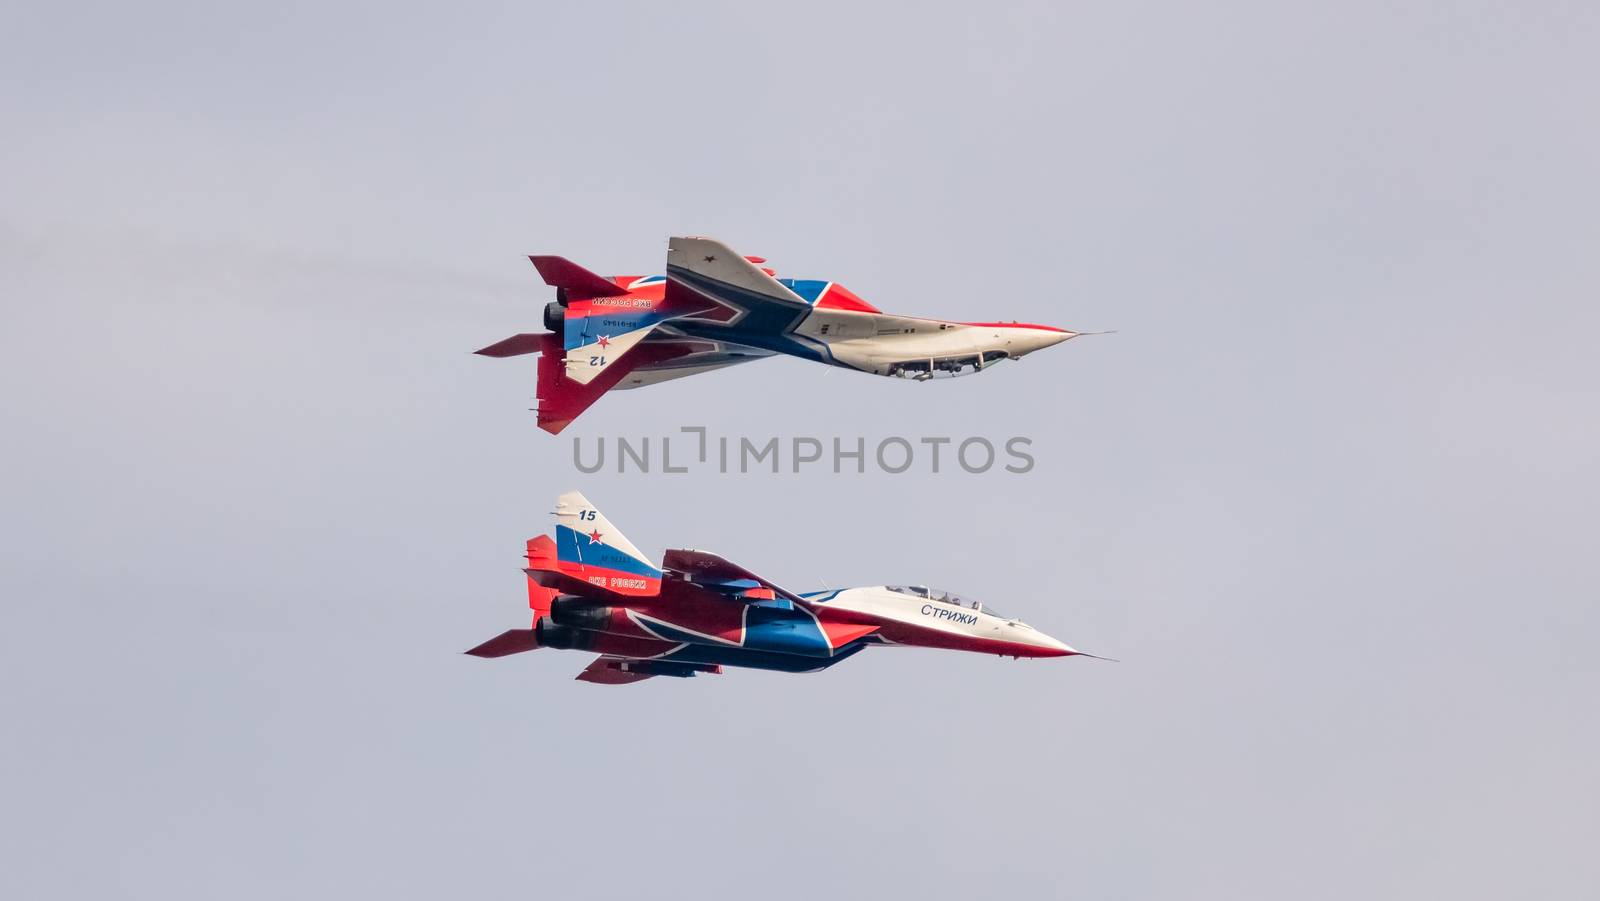 Barnaul, Russia - September 19, 2020: A low angle close-up shot of Strizhi MiG-29 fighter jets flying symmetrically with one of the fighter jets flying above the other during an aeroshow